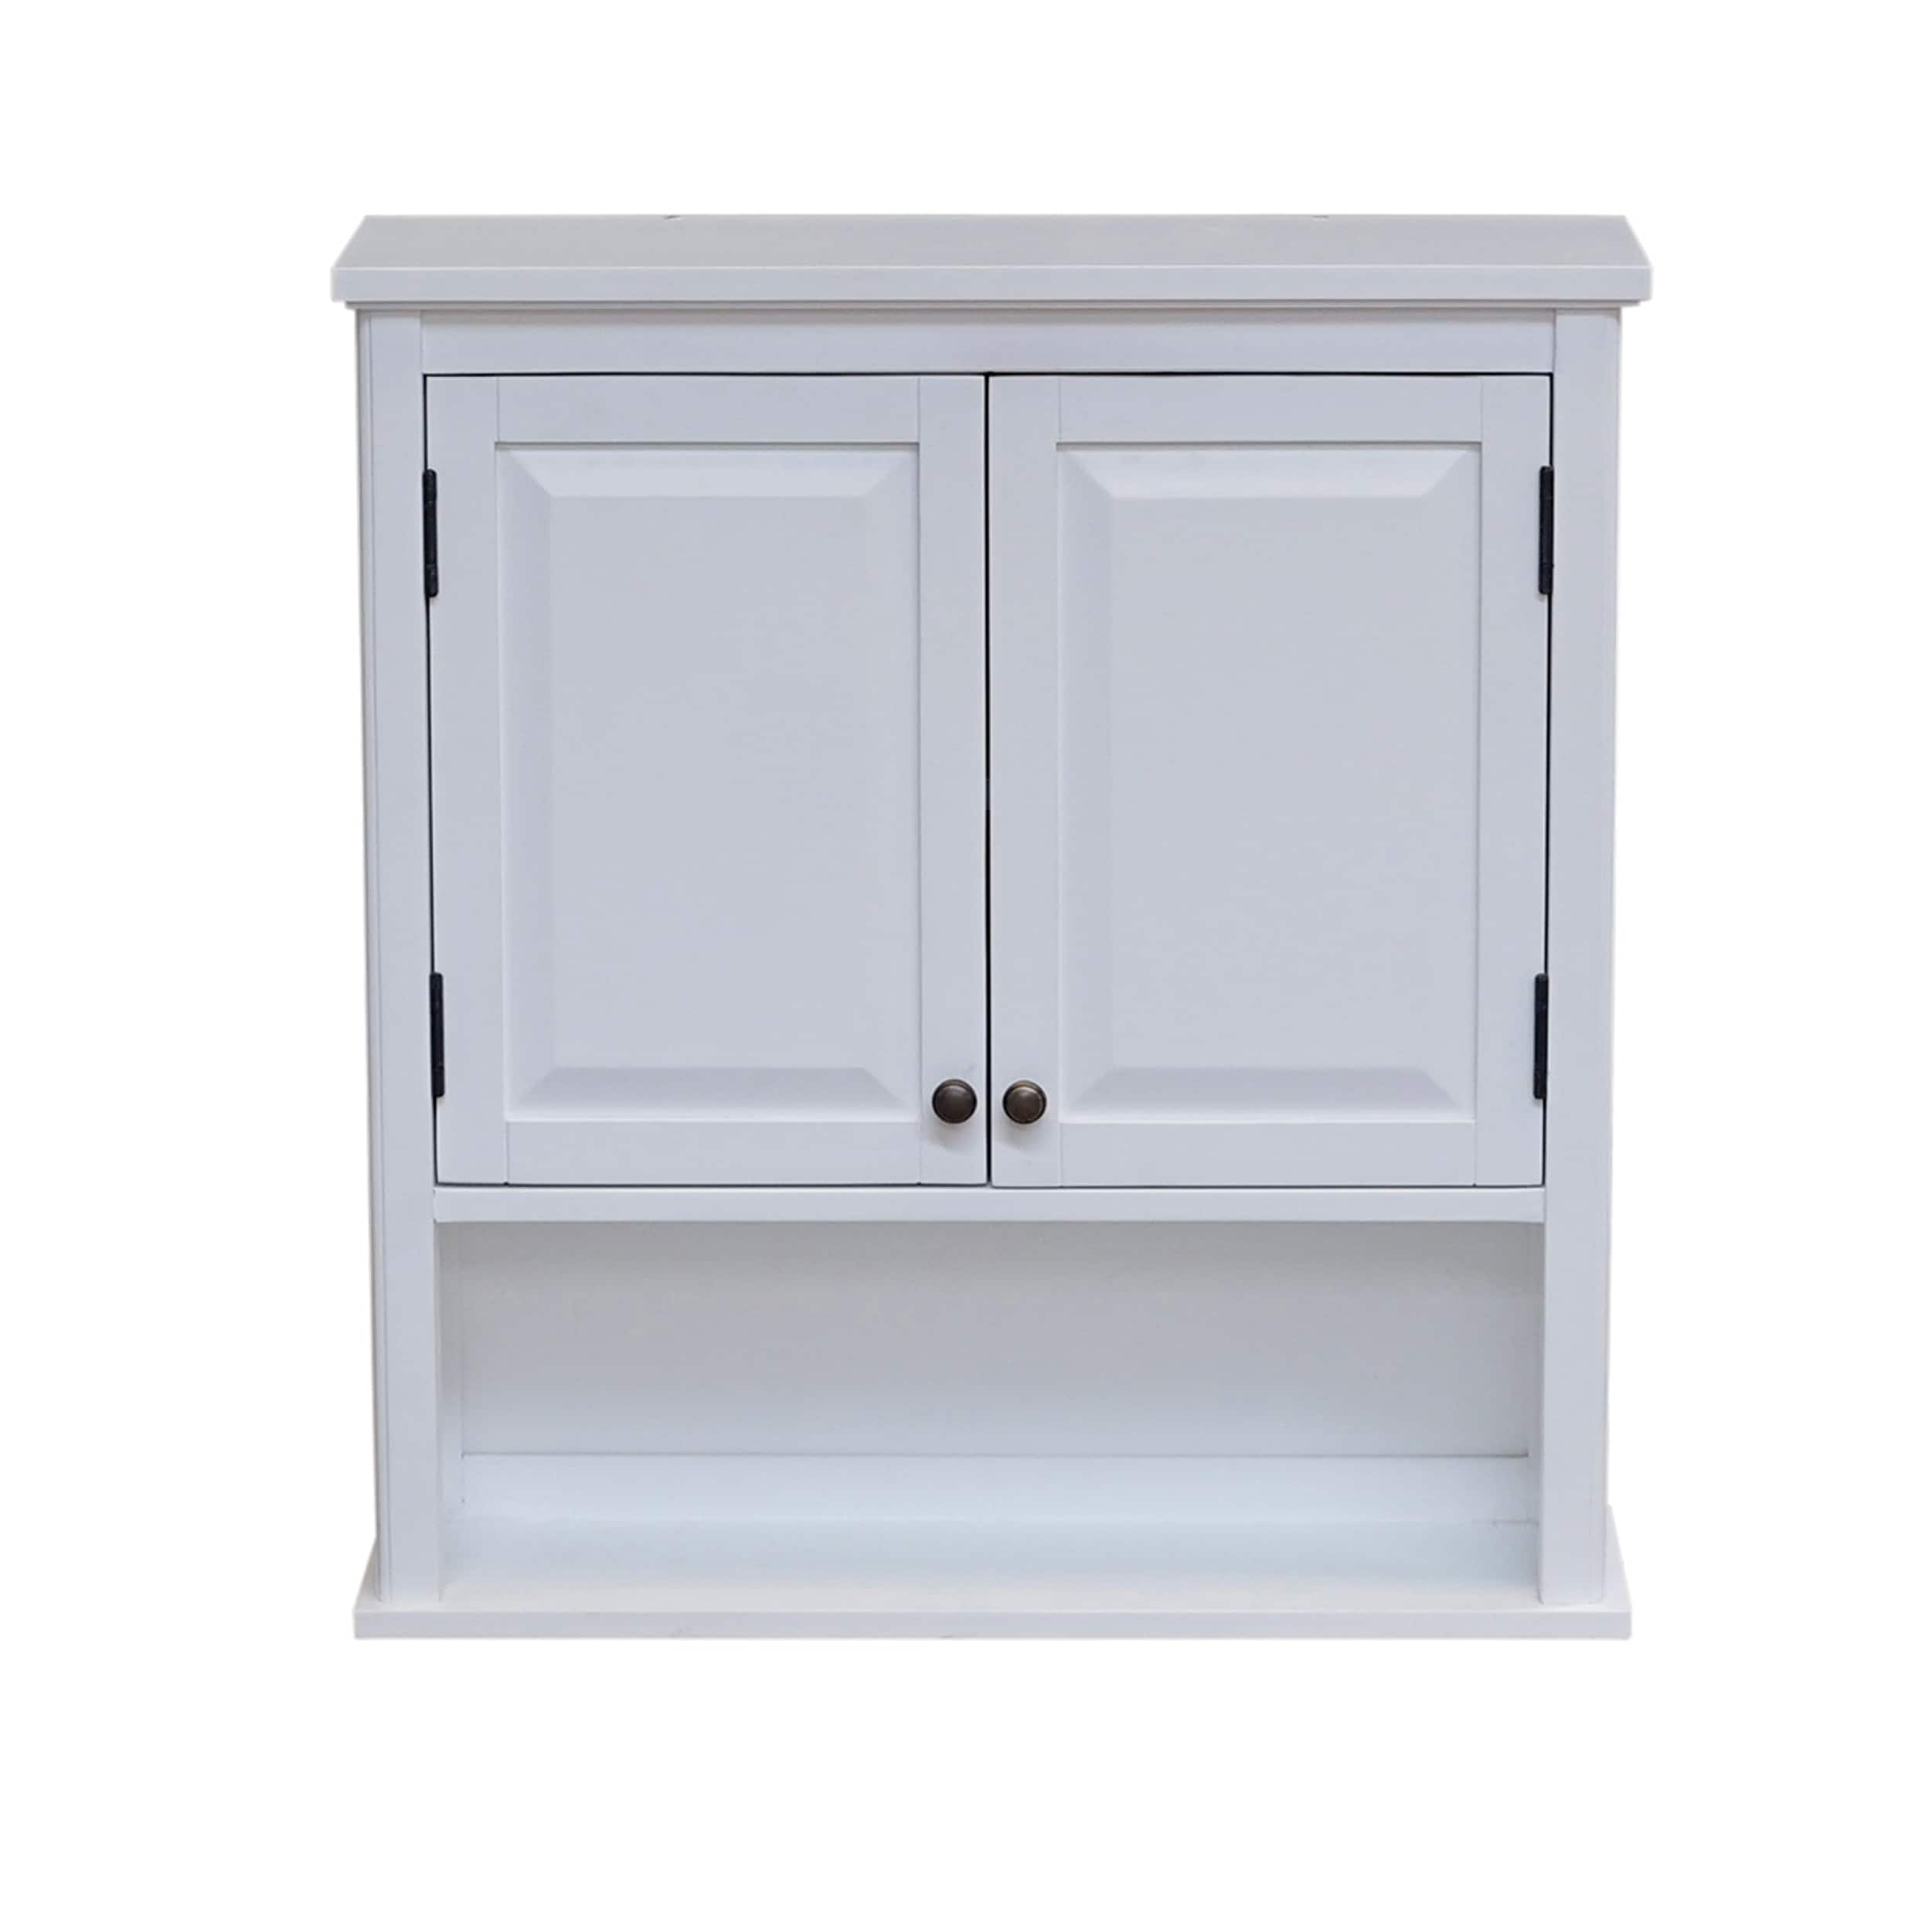 Alaterre Furniture 27-in x 29-in x 9-in White Wood Wall-mount Linen ...